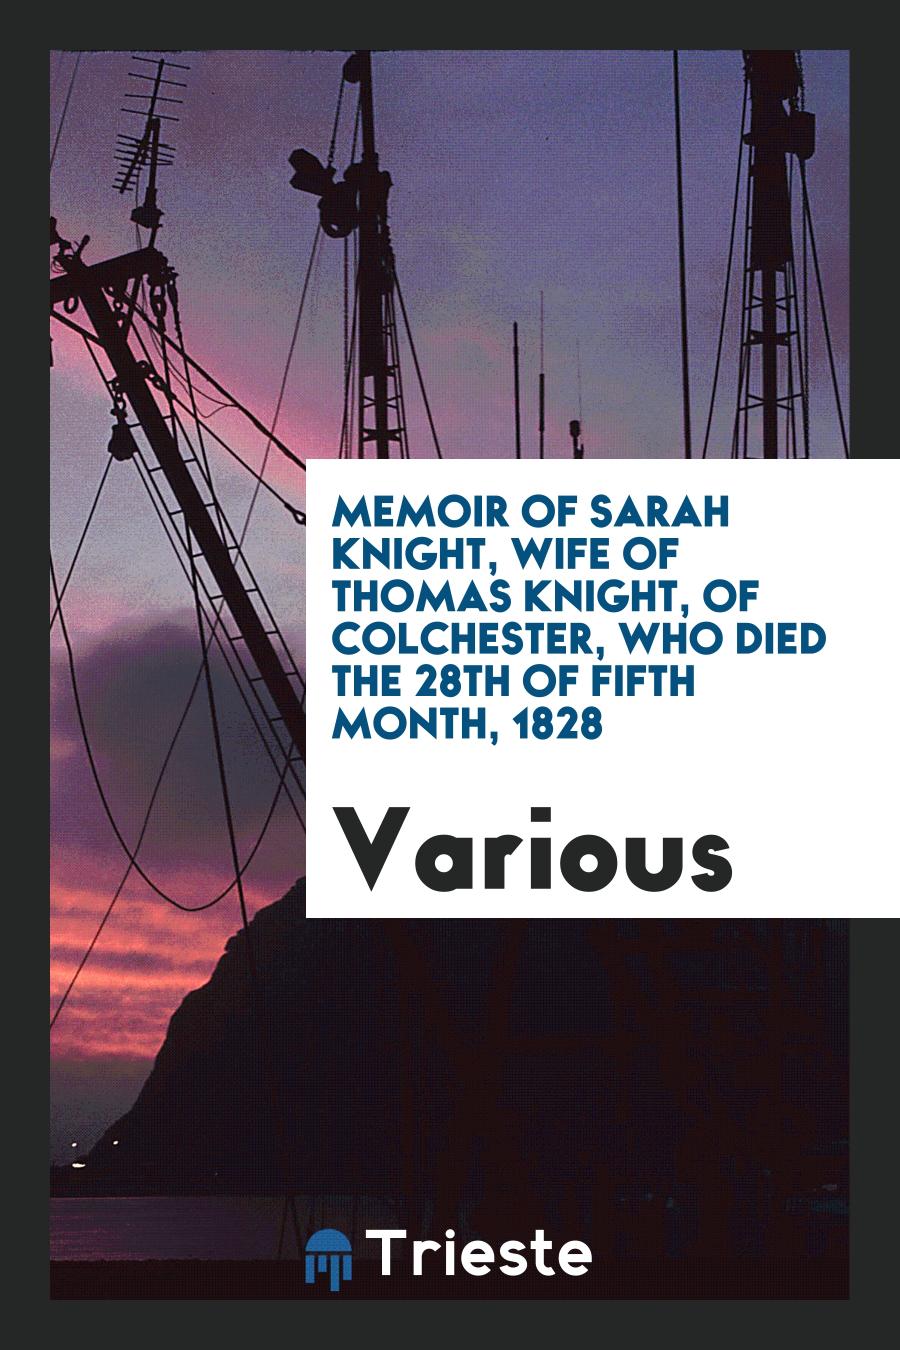 Memoir of Sarah Knight, Wife of Thomas Knight, of Colchester, who Died the 28th of Fifth Month, 1828